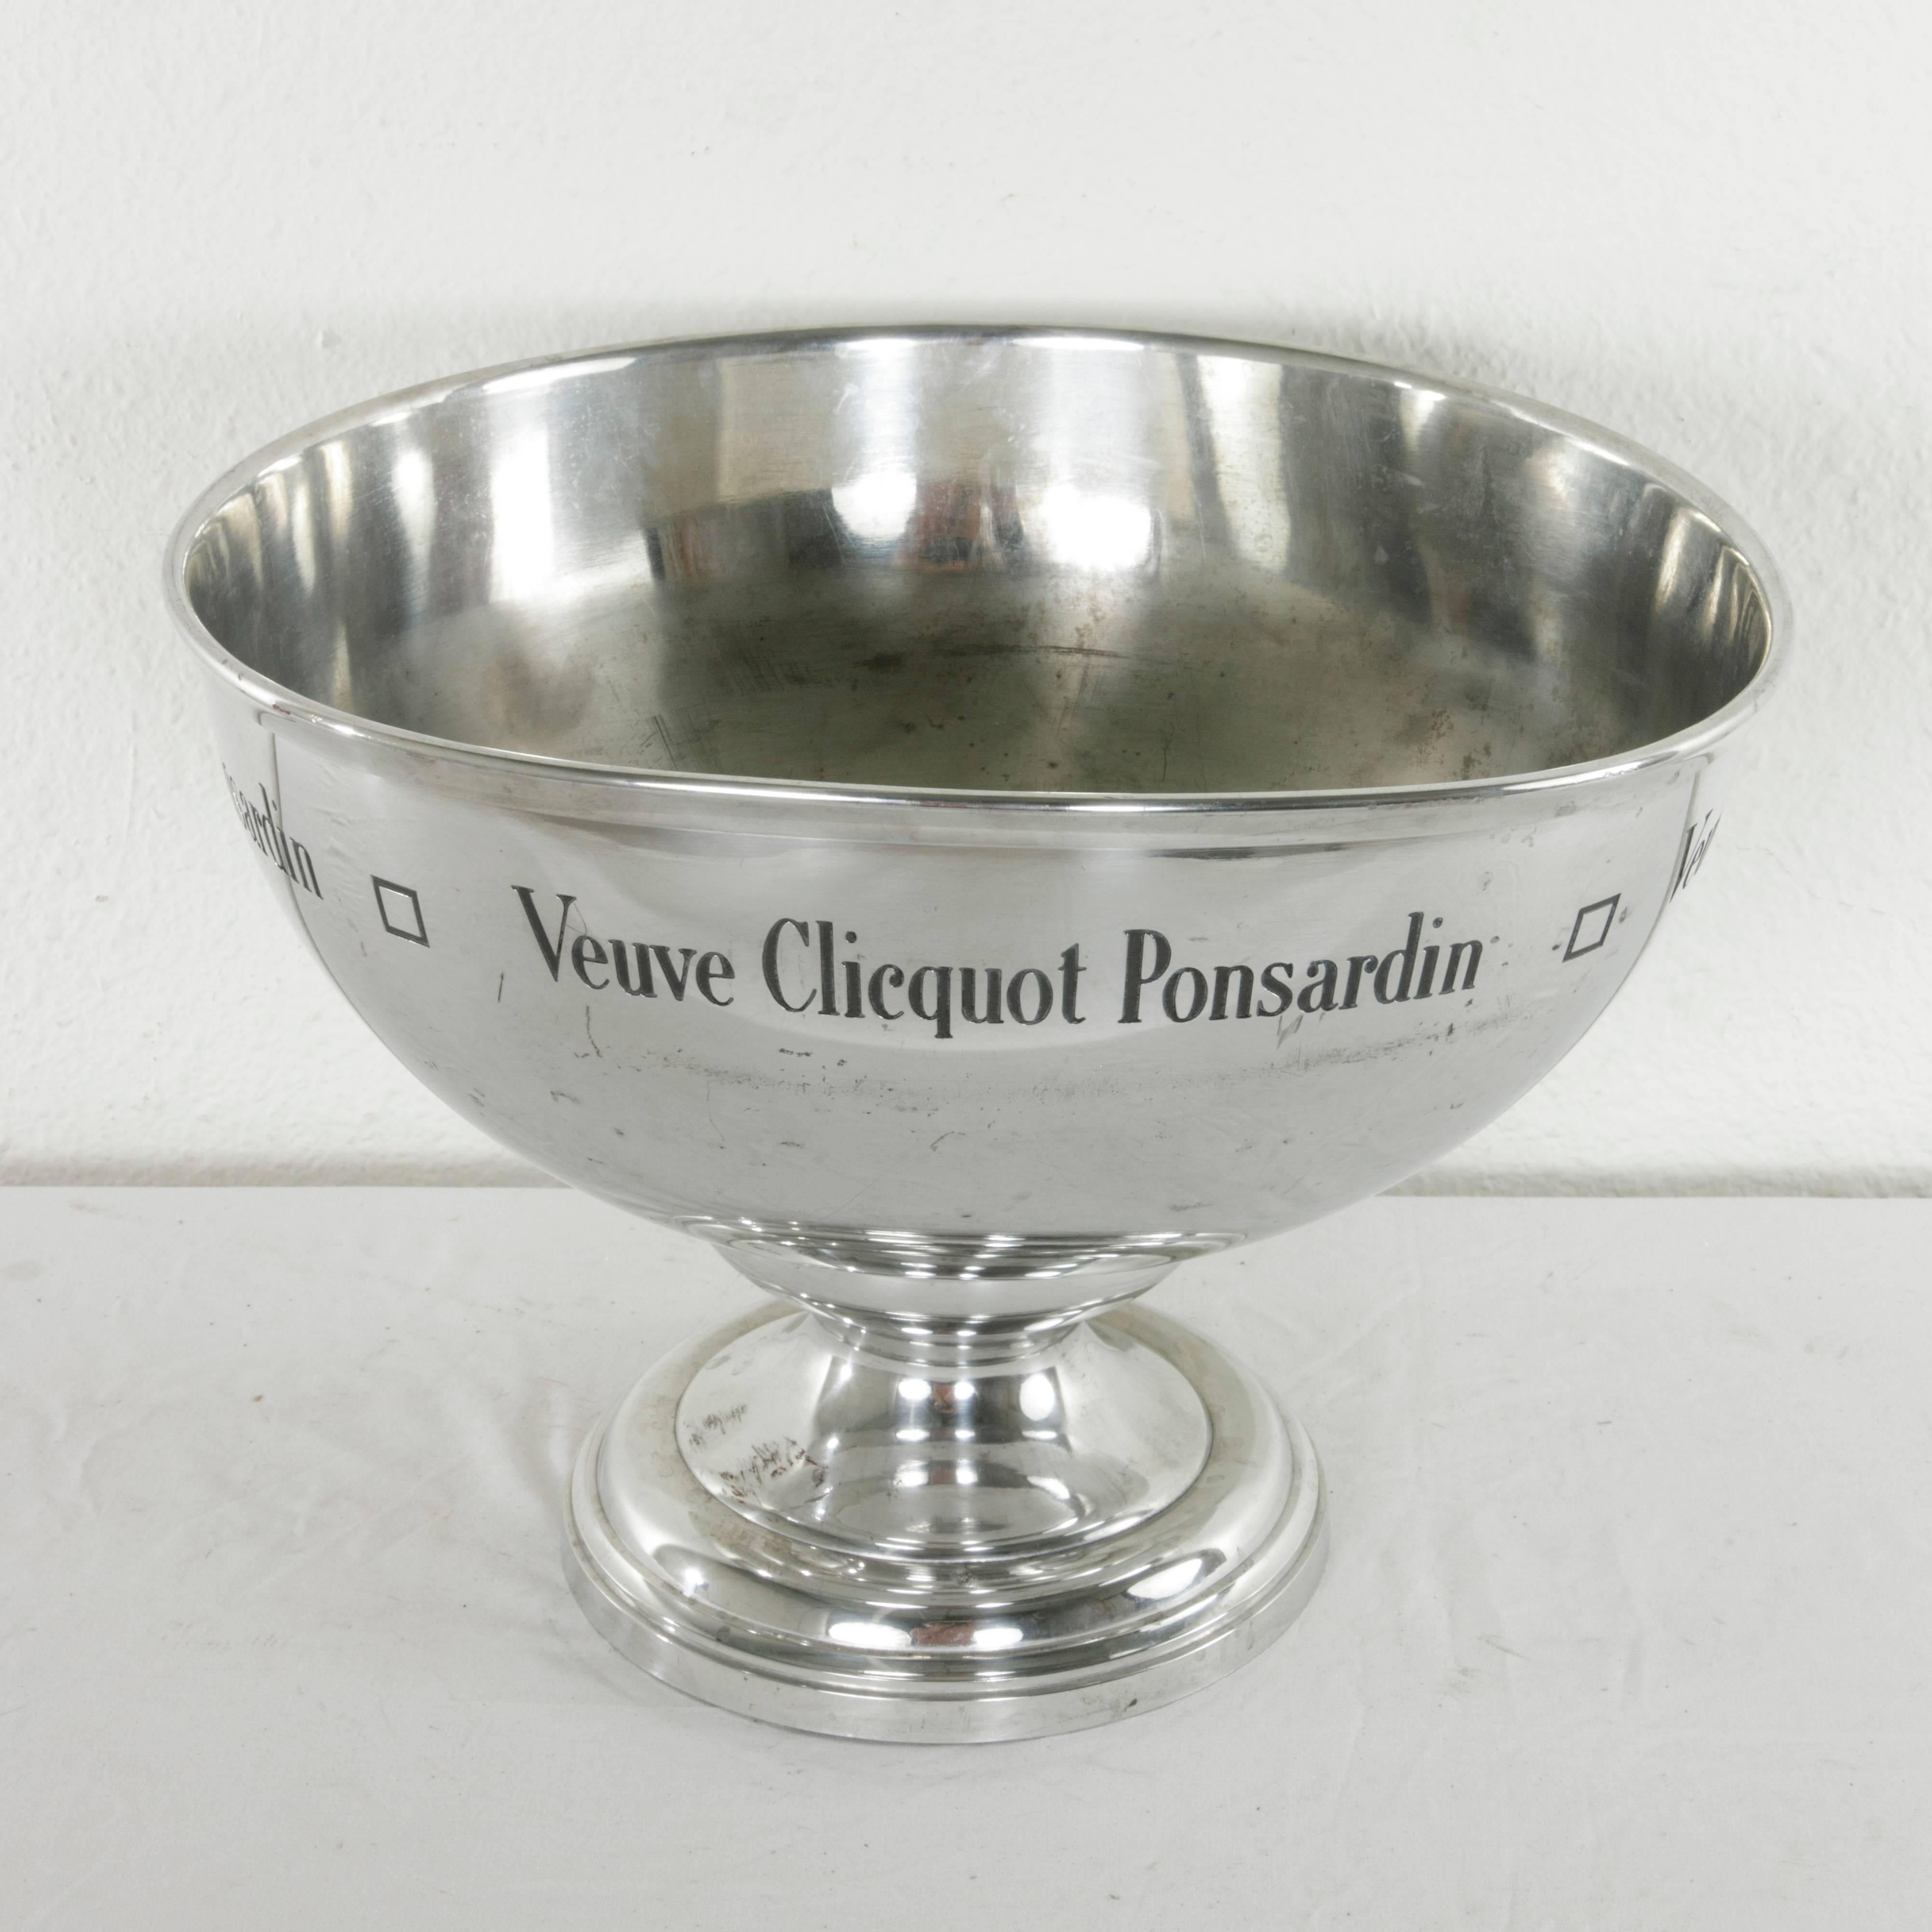 This mid-20th century silver plate over pewter hotel champagne bucket holds four to six bottles and features the name of the renowned champagne producer Veuve Clicquot Ponsardin around the upper rim. Stamped on the bottom by the French fabricator,